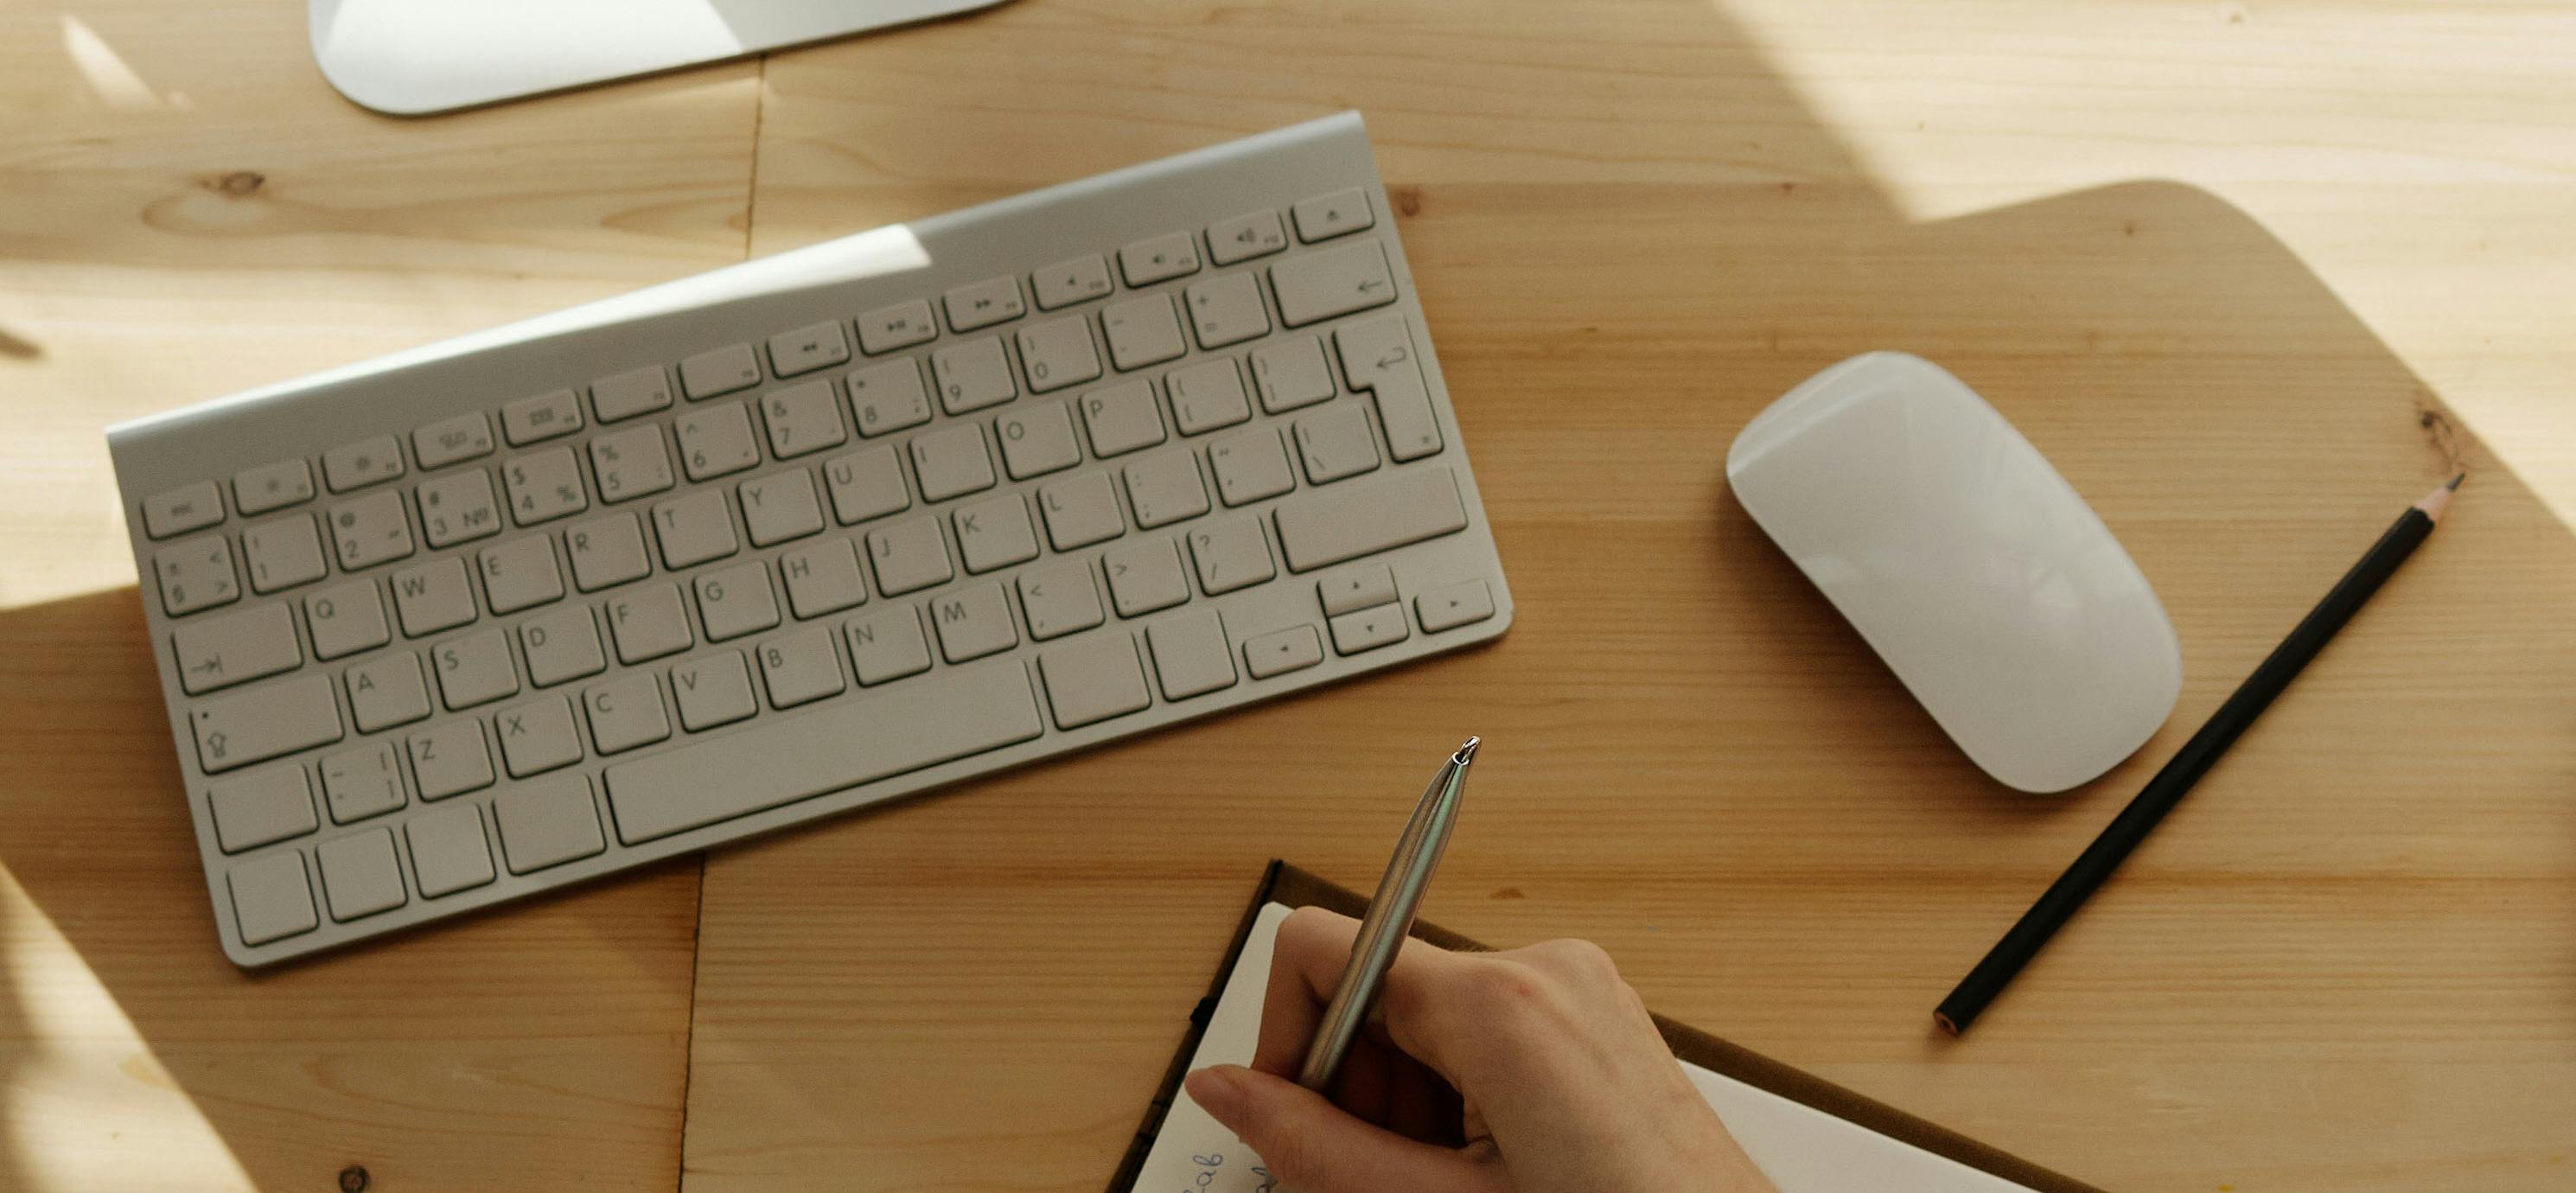 Close-up of a desk with a wireless keyboard, wireless mouse and a hand writing notes on a piece of paper